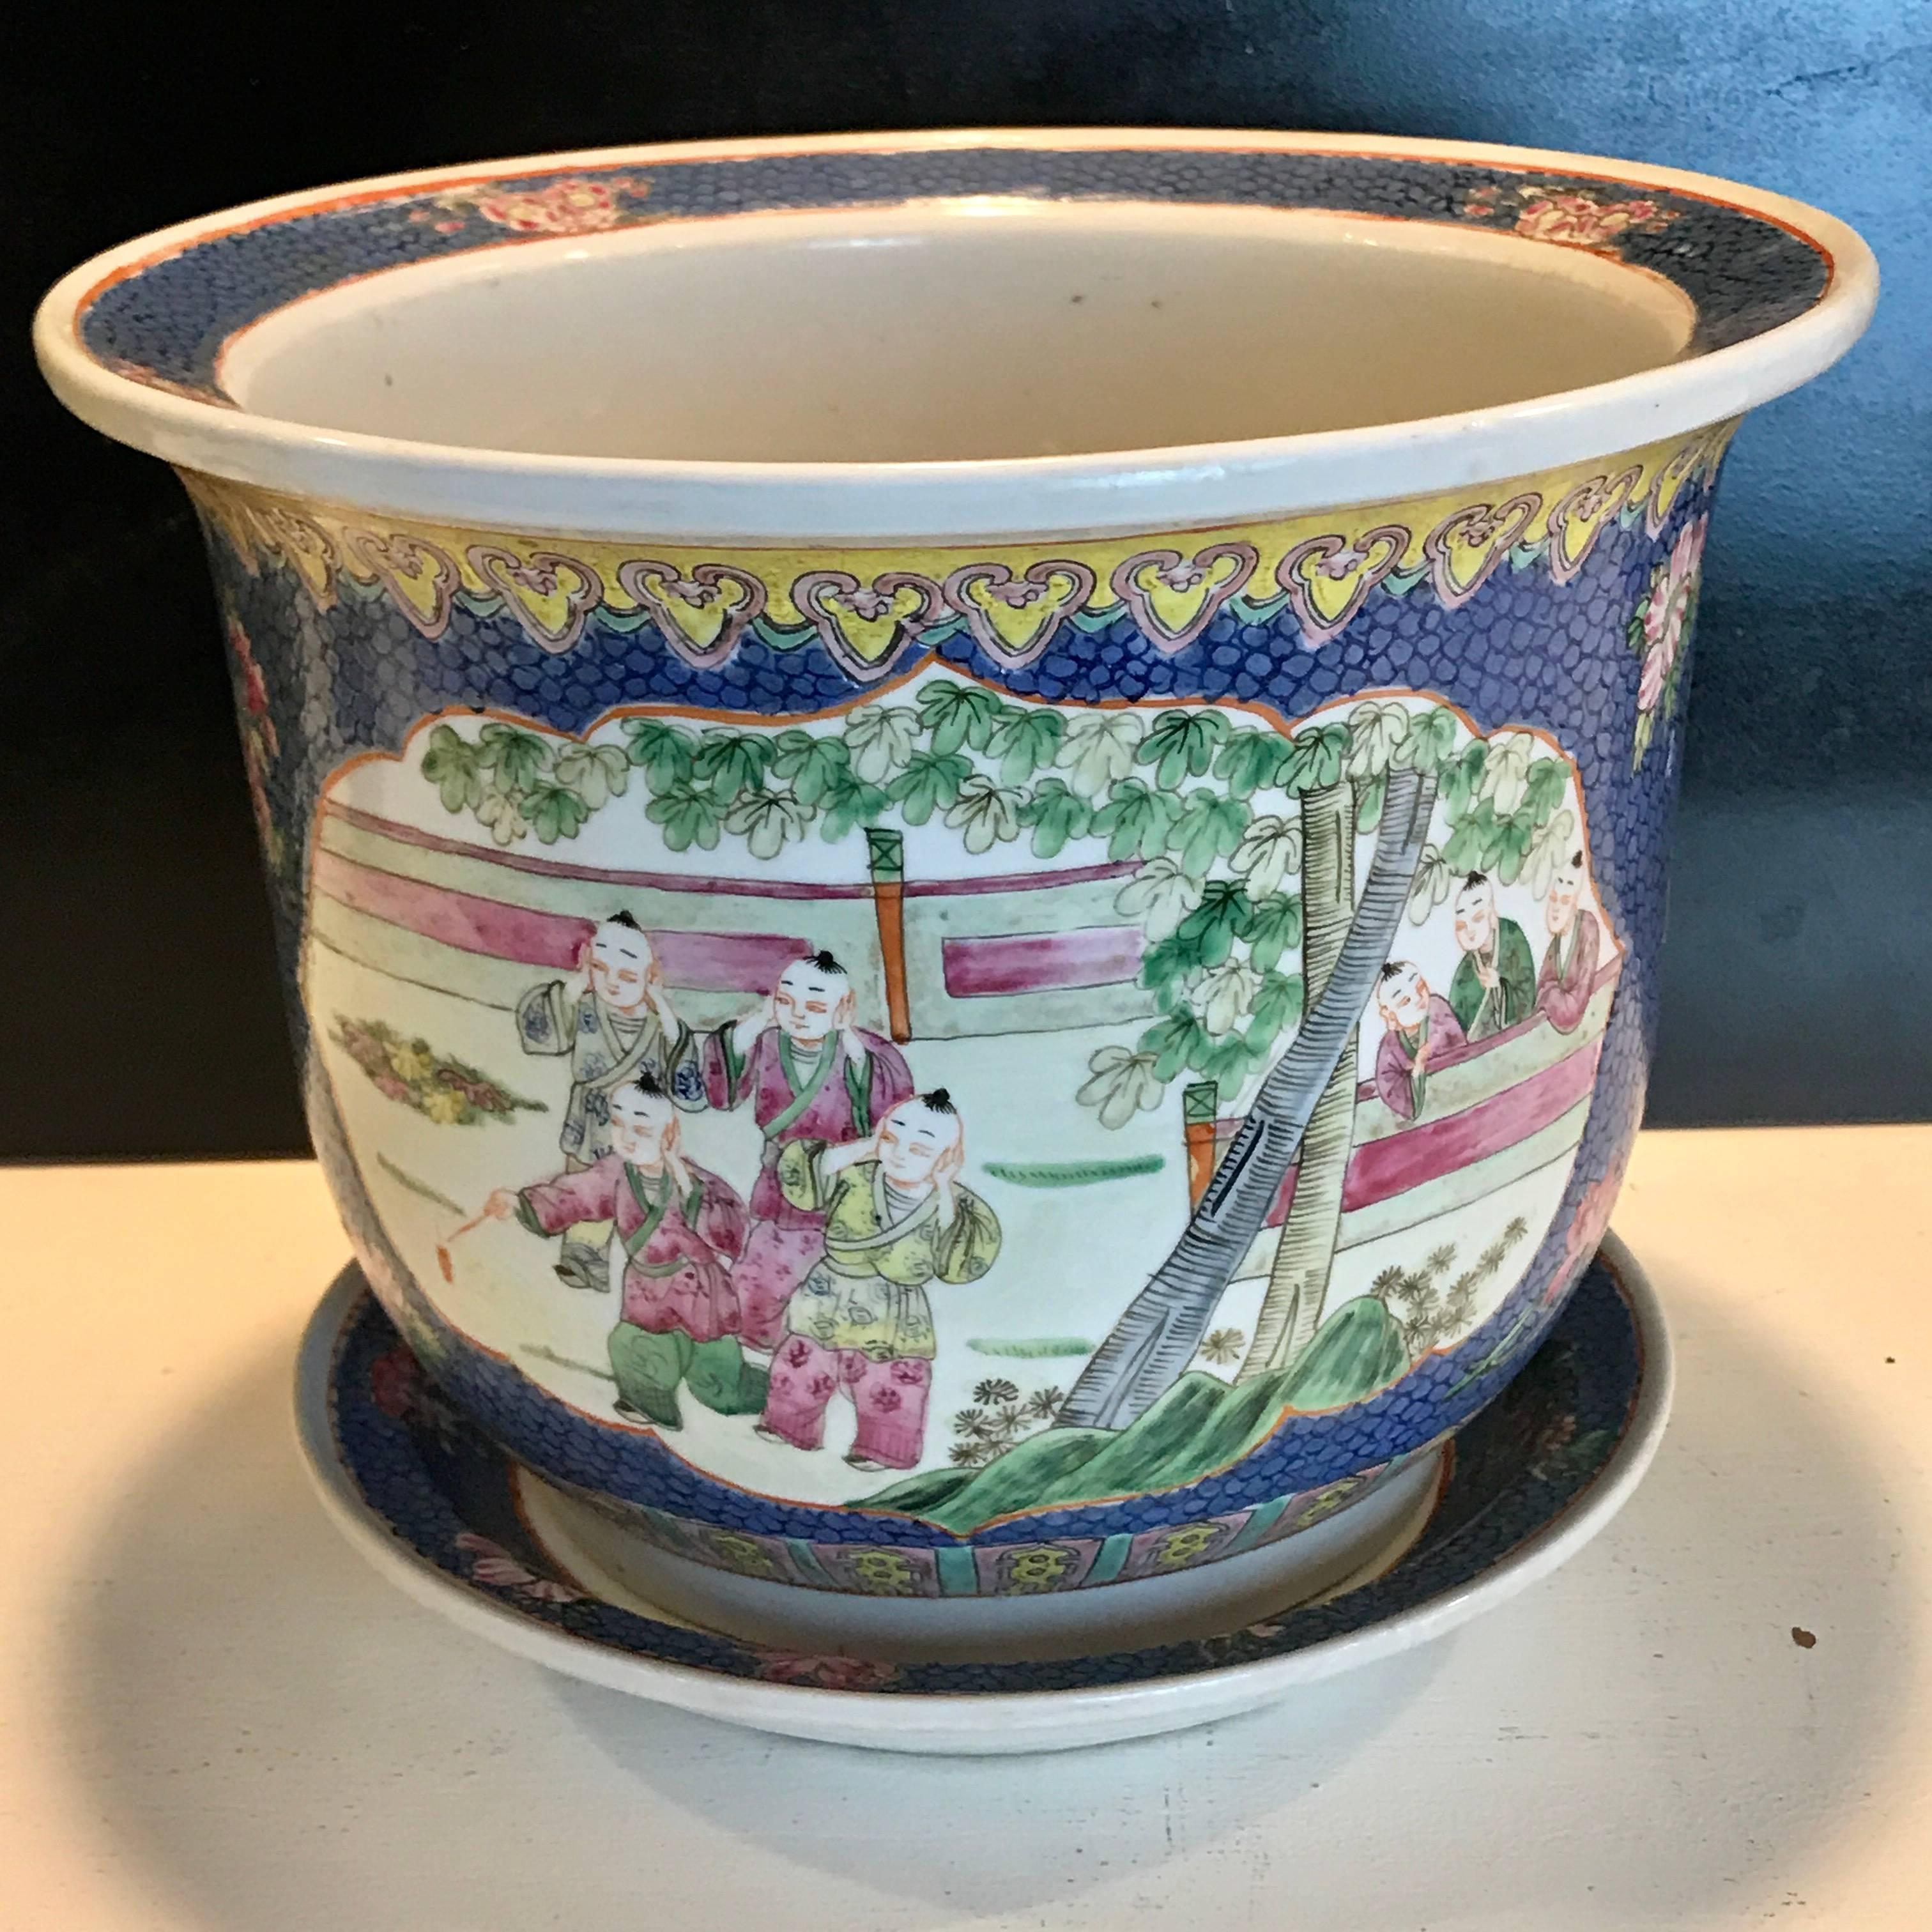 Republic Chinese Famille verte cachepot and underplate, finely decorated two vignettes
the cachepot measures 8.5